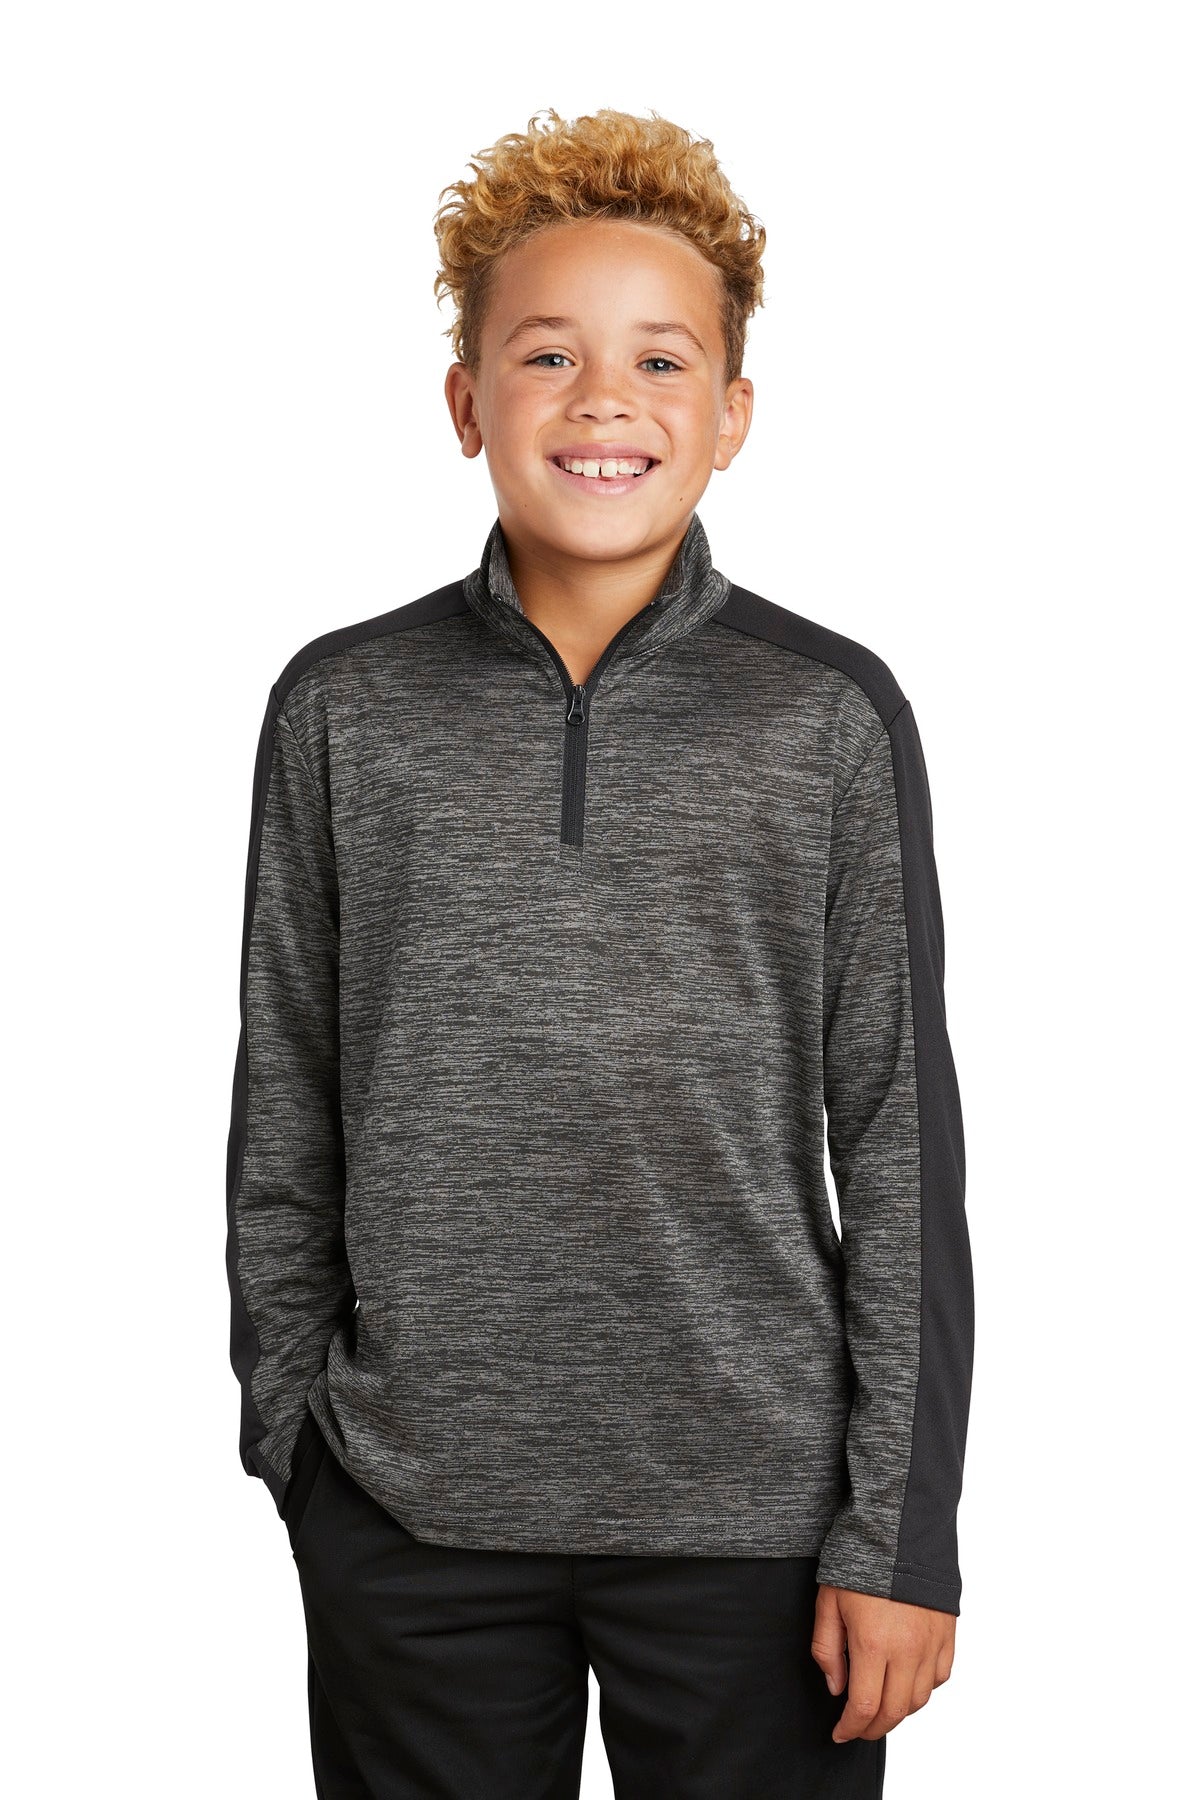 Sport-Tek ® Youth PosiCharge ® Electric Heather Colorblock 1/4-Zip Pullover. YST397